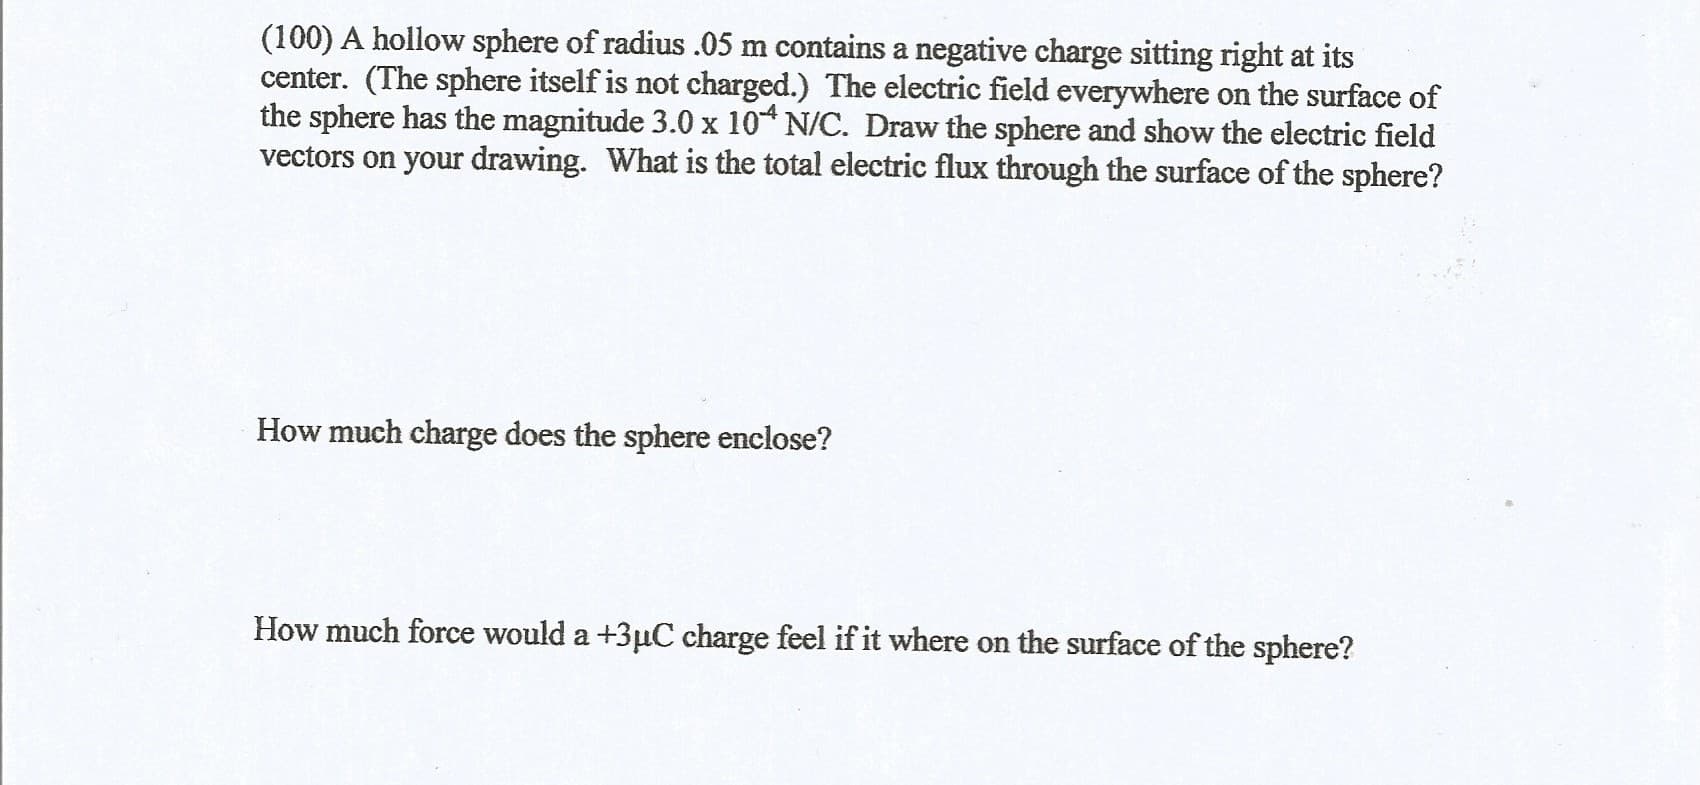 (100) A hollow sphere of radius .05 m contains a negative charge sitting right at its
center. (The sphere itself is not charged.) The electric field everywhere on the surface of
the sphere has the magnitude 3.0 x 10* N/C. Draw the sphere and show the electric field
vectors on your drawing. What is the total electric flux through the surface of the sphere?
How much charge does the sphere enclose?
How much force would a +3µC charge feel if it where on the surface of the sphere?
